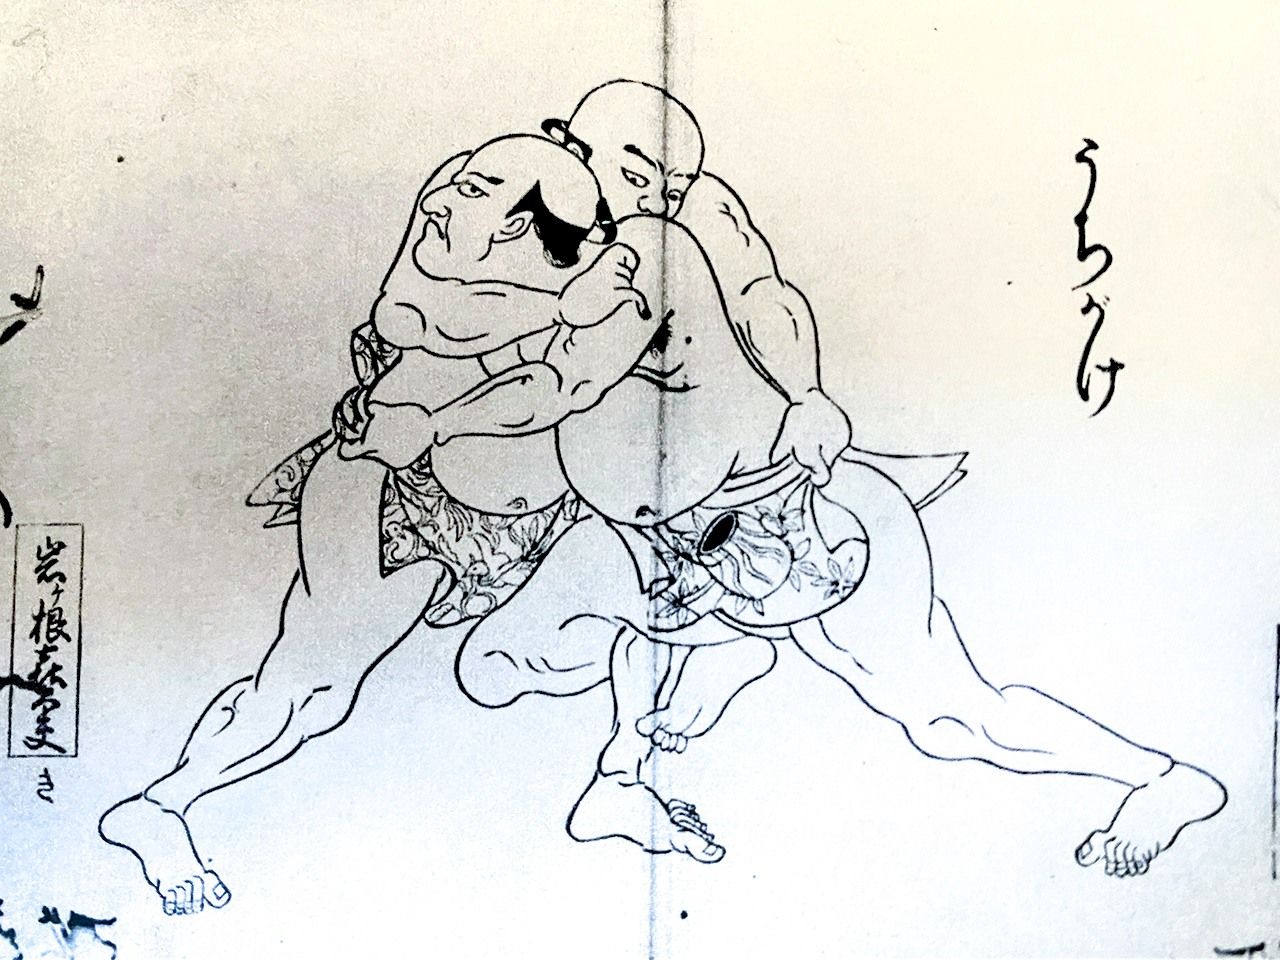 The uchigake inside leg trip, one of the 48 match-winning techniques, from an Edo-period book on sumō. (Courtesy Ōzumō Journal)